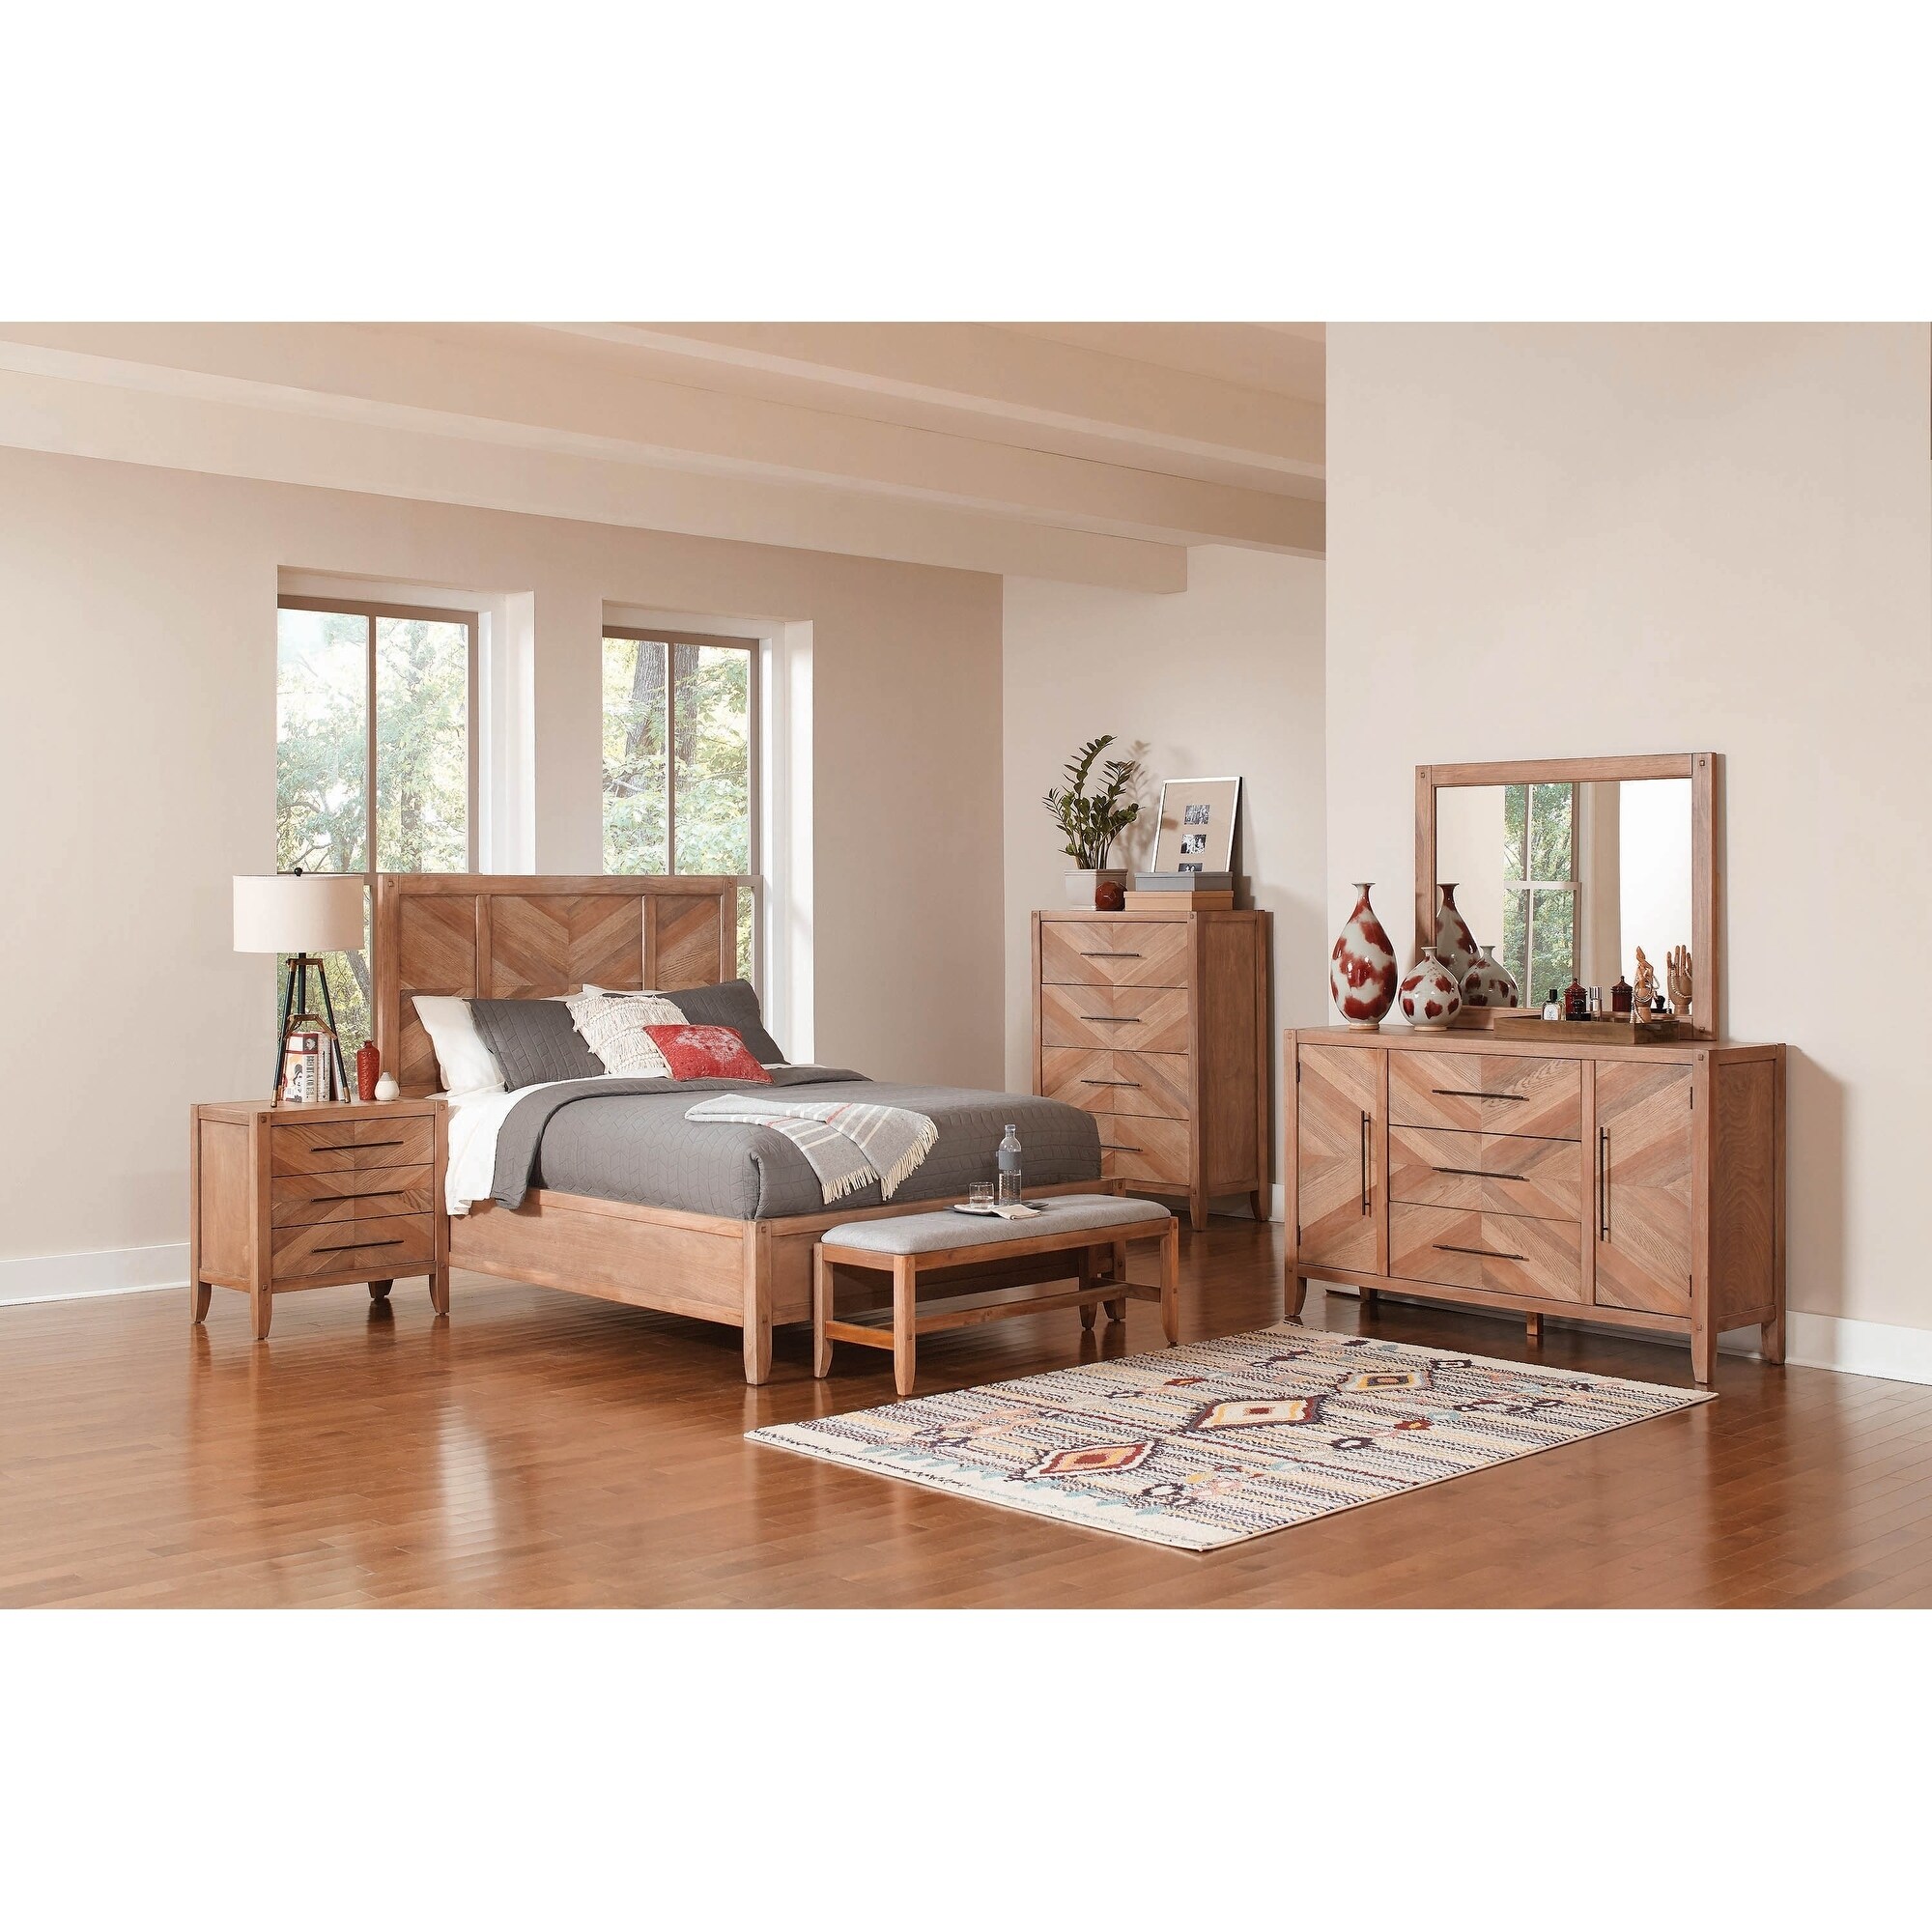 Shop Pensacola White Washed Natural 3 Piece Panel Bedroom Set With